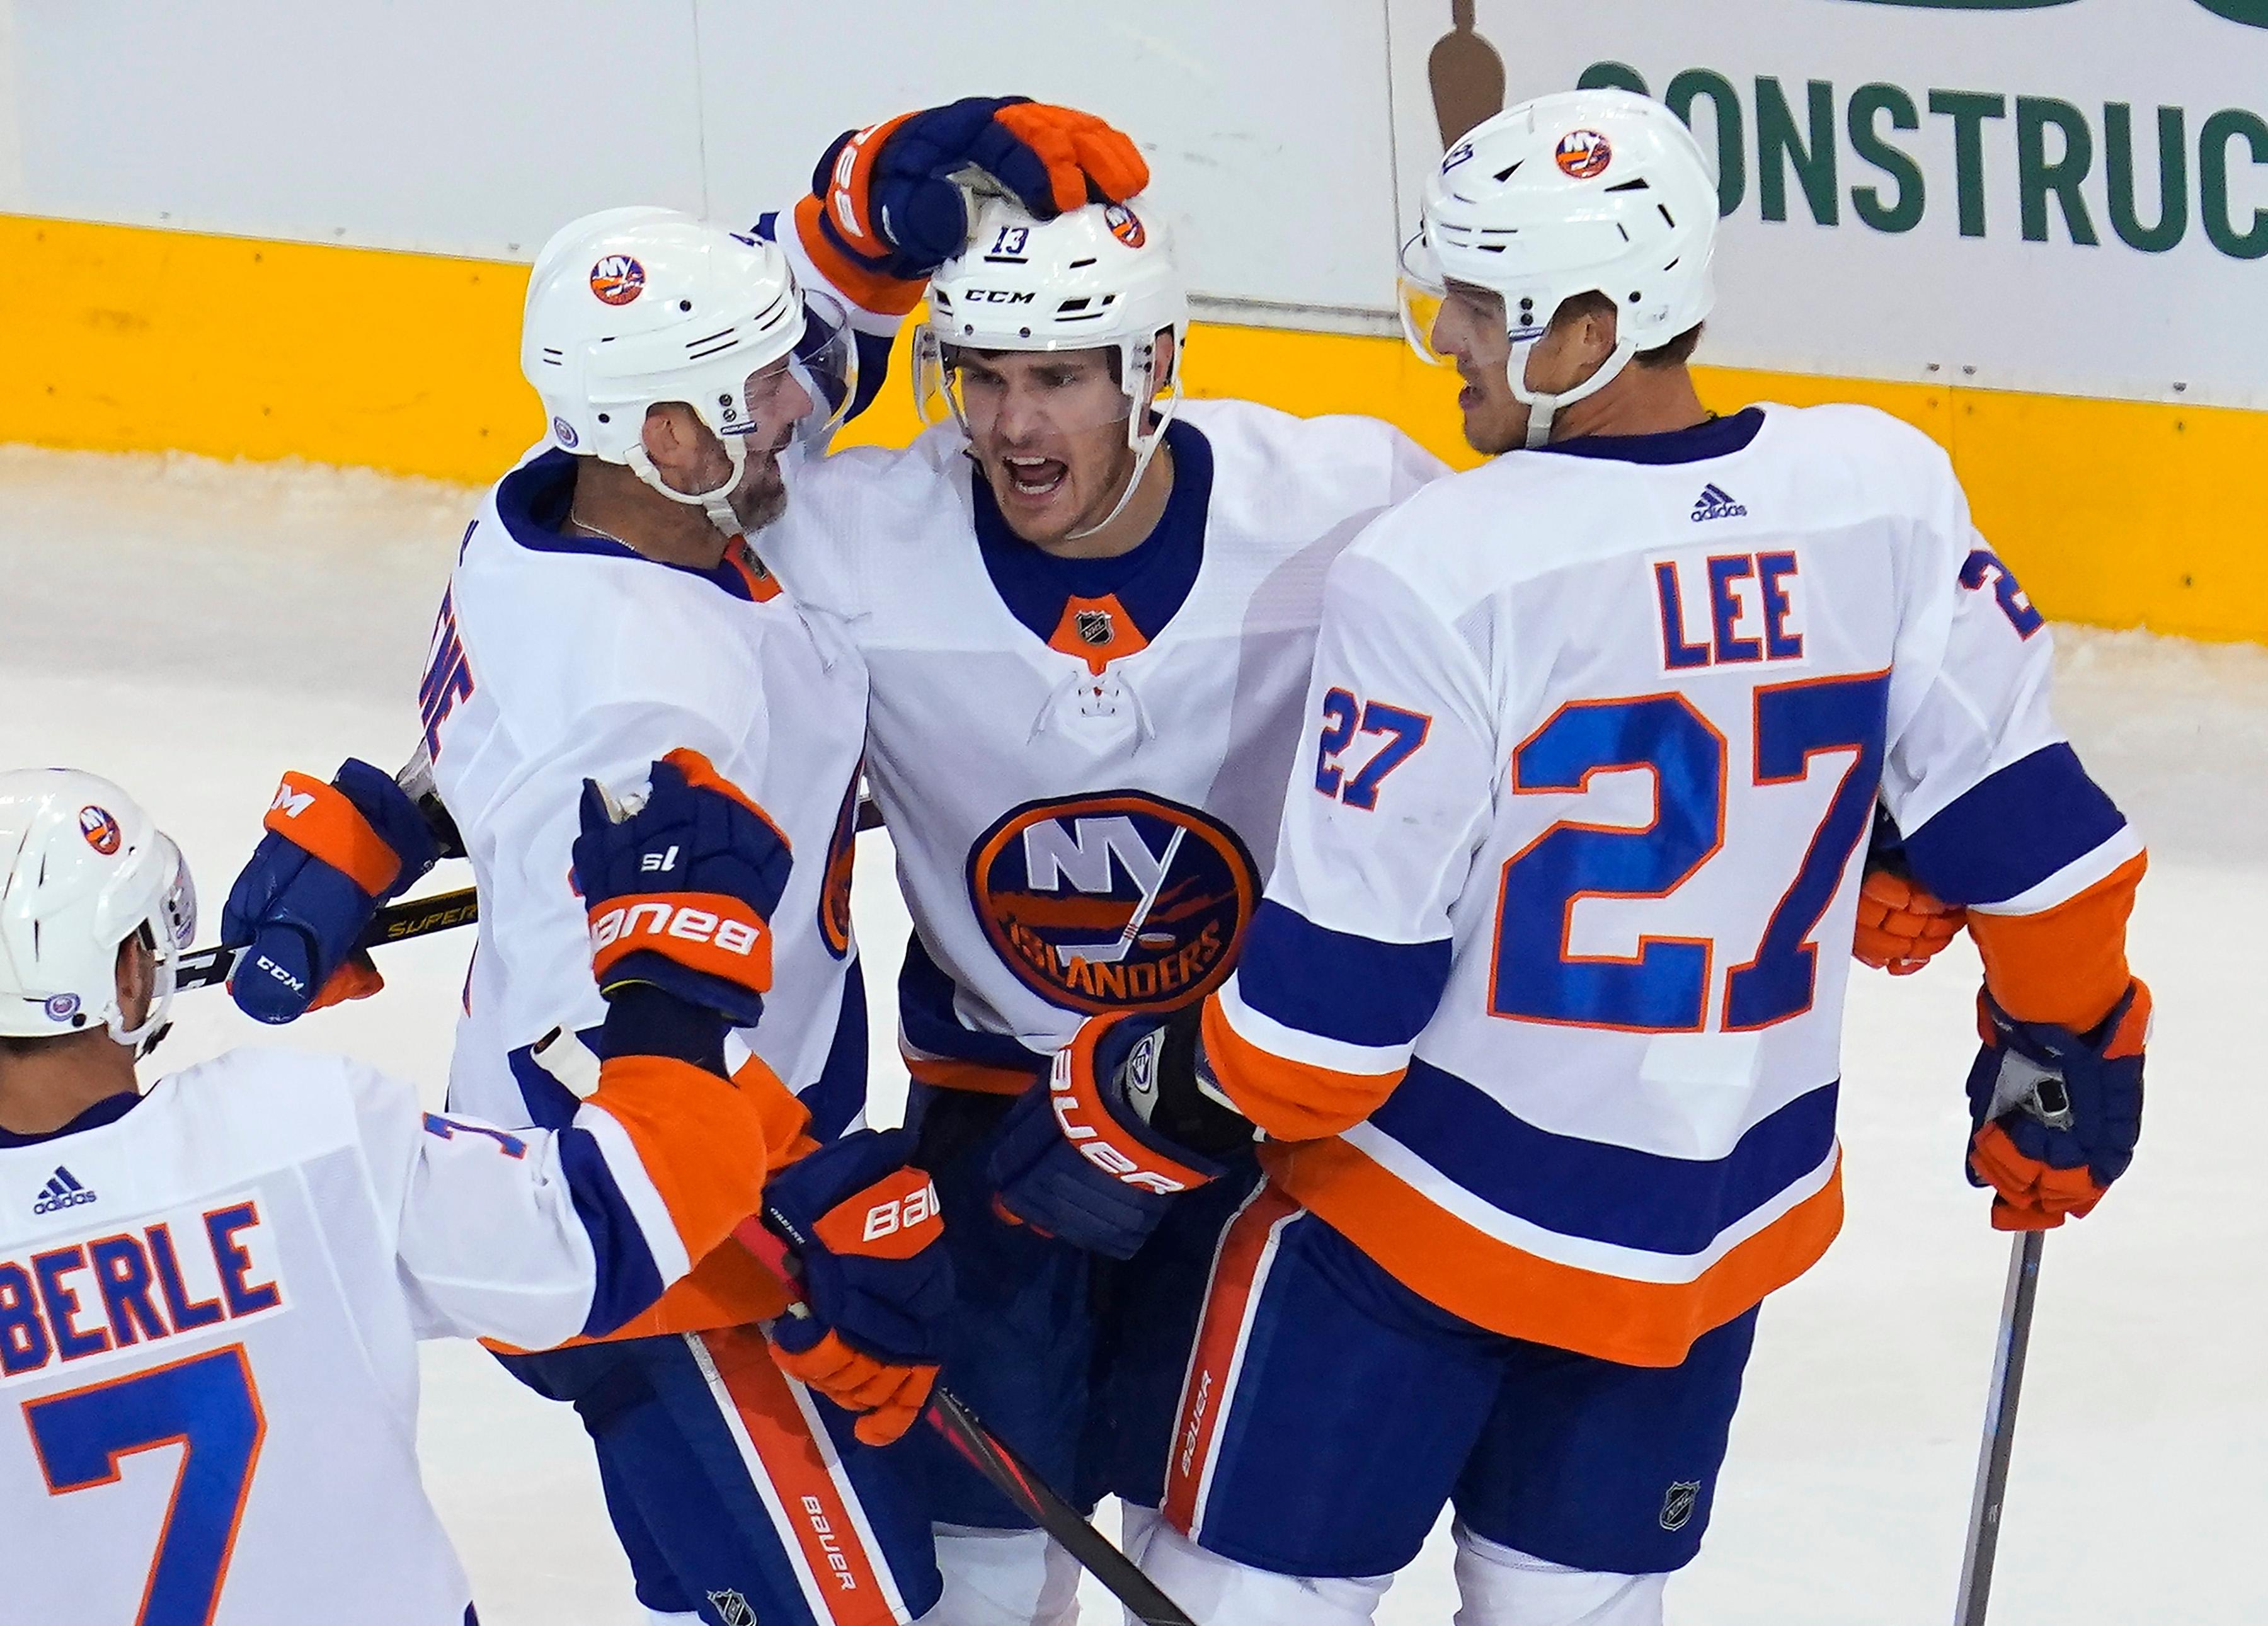 Aug 7, 2020; Toronto, Ontario, CAN; New York Islanders forward Mathew Barzal (13) celebrates his goal against the Florida Panthers with New York Islanders defenseman Andy Greene (4) and forward Anders Lee (27) during the third period of Eastern Conference qualifications at Scotiabank Arena. New York defeated Florida. / John E. Sokolowski/USA TODAY Sports